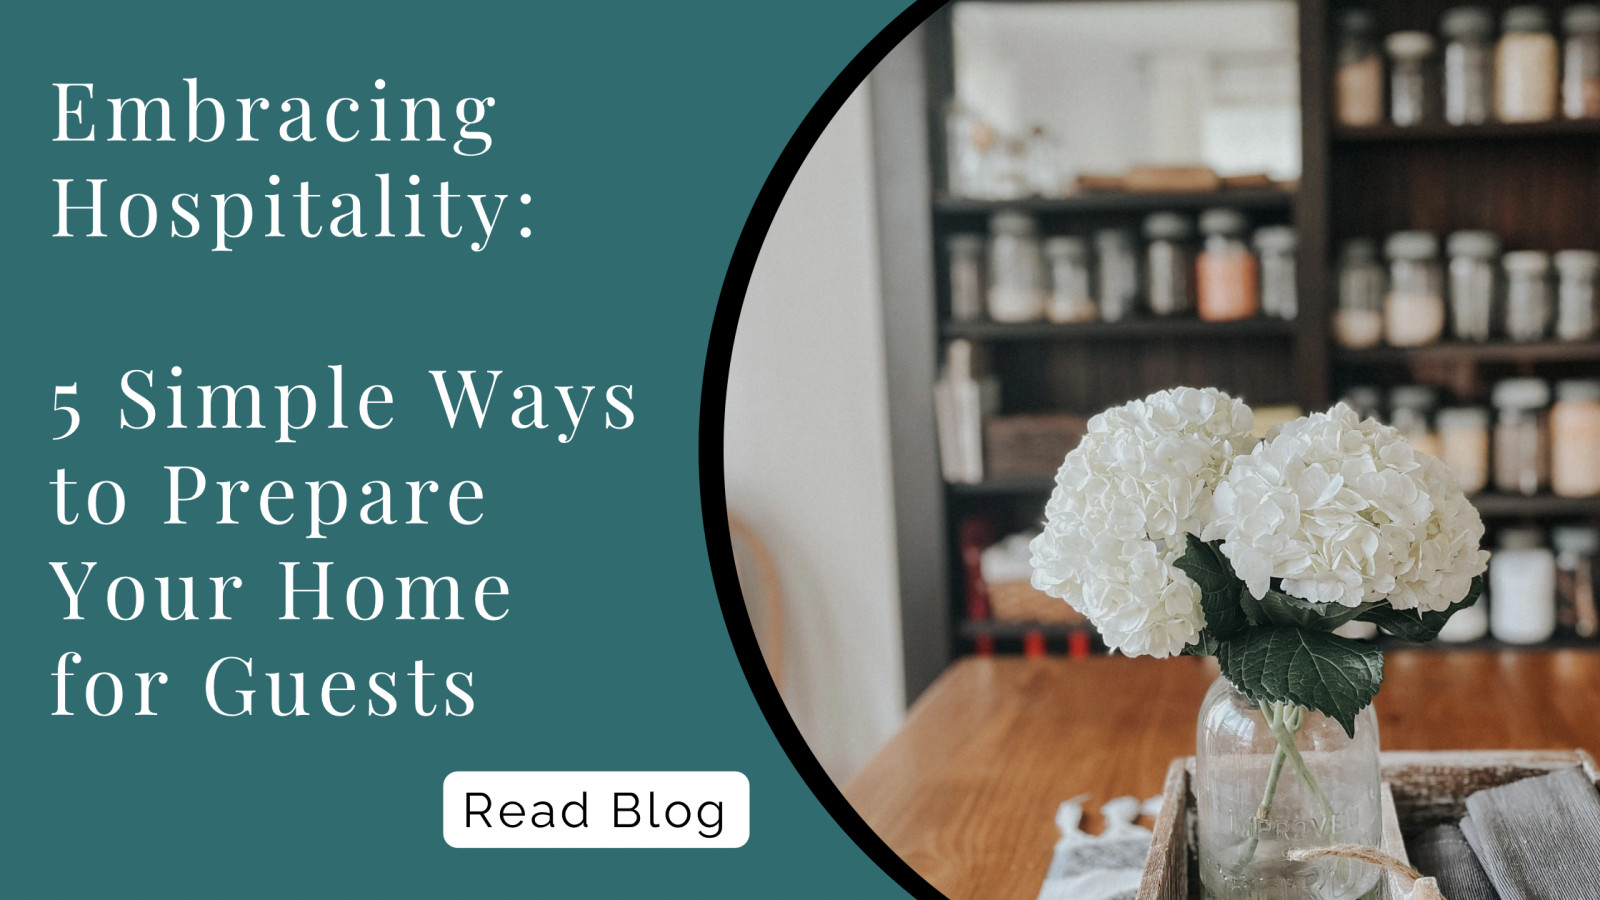 Embracing Hospitality: 5 Simple Ways to Prep Your Home for Guests